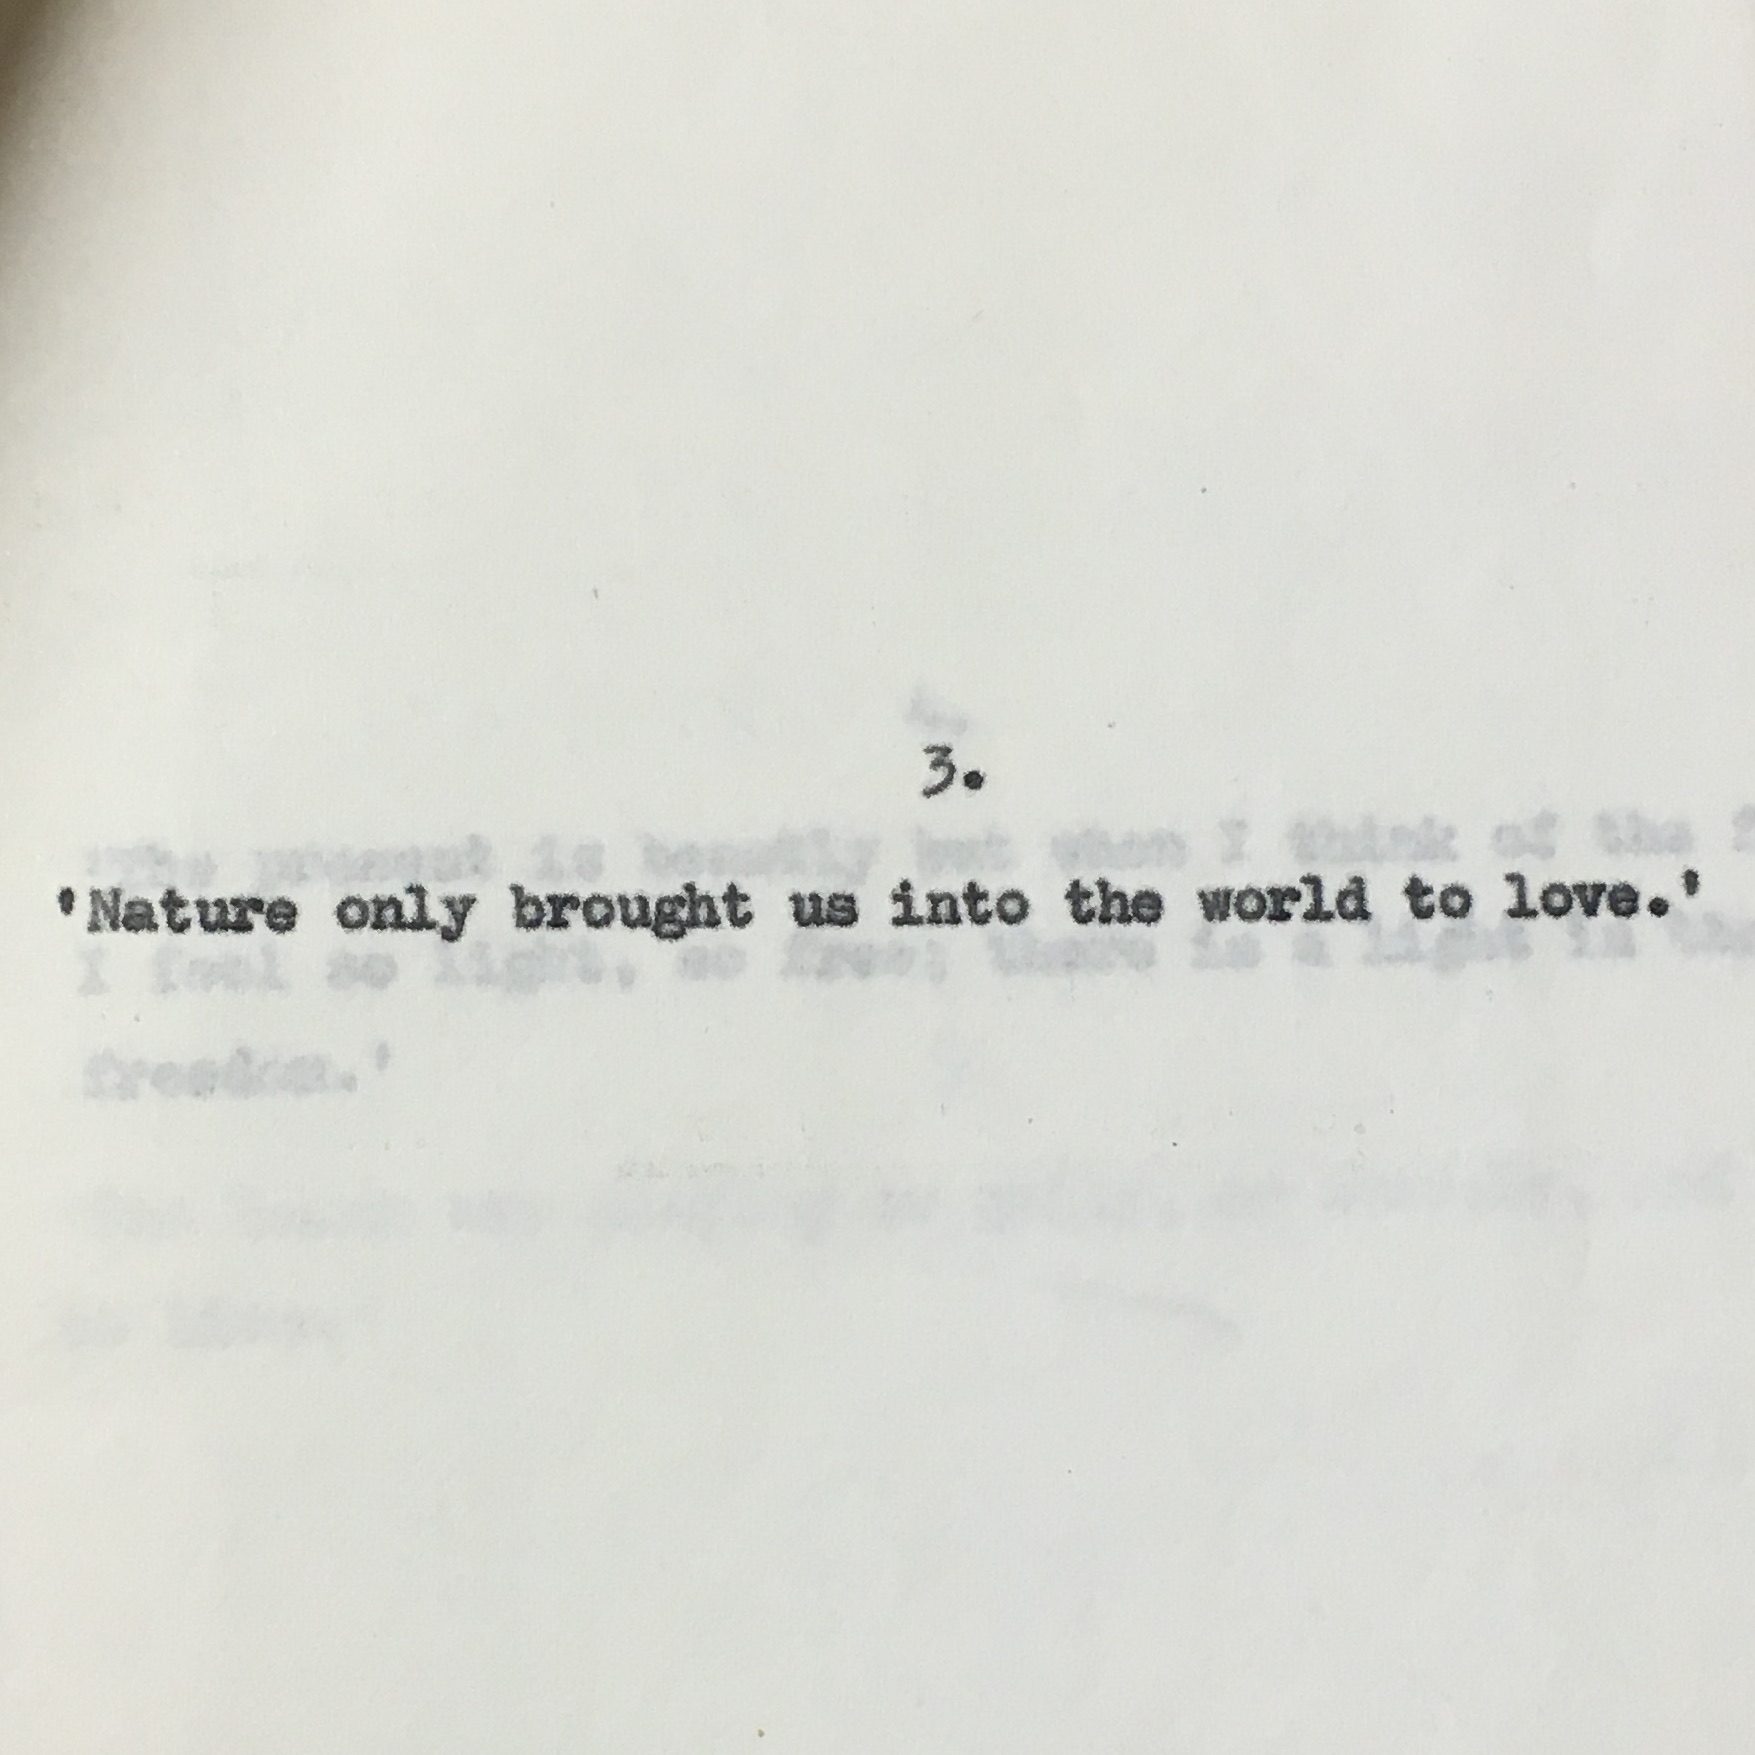 'Nature only bought us into the world to love', a detail from a typescript for The Erotic Land of Faery, Maureen-Duffy, held at K/PP56, Box 1, King's College London Archives.